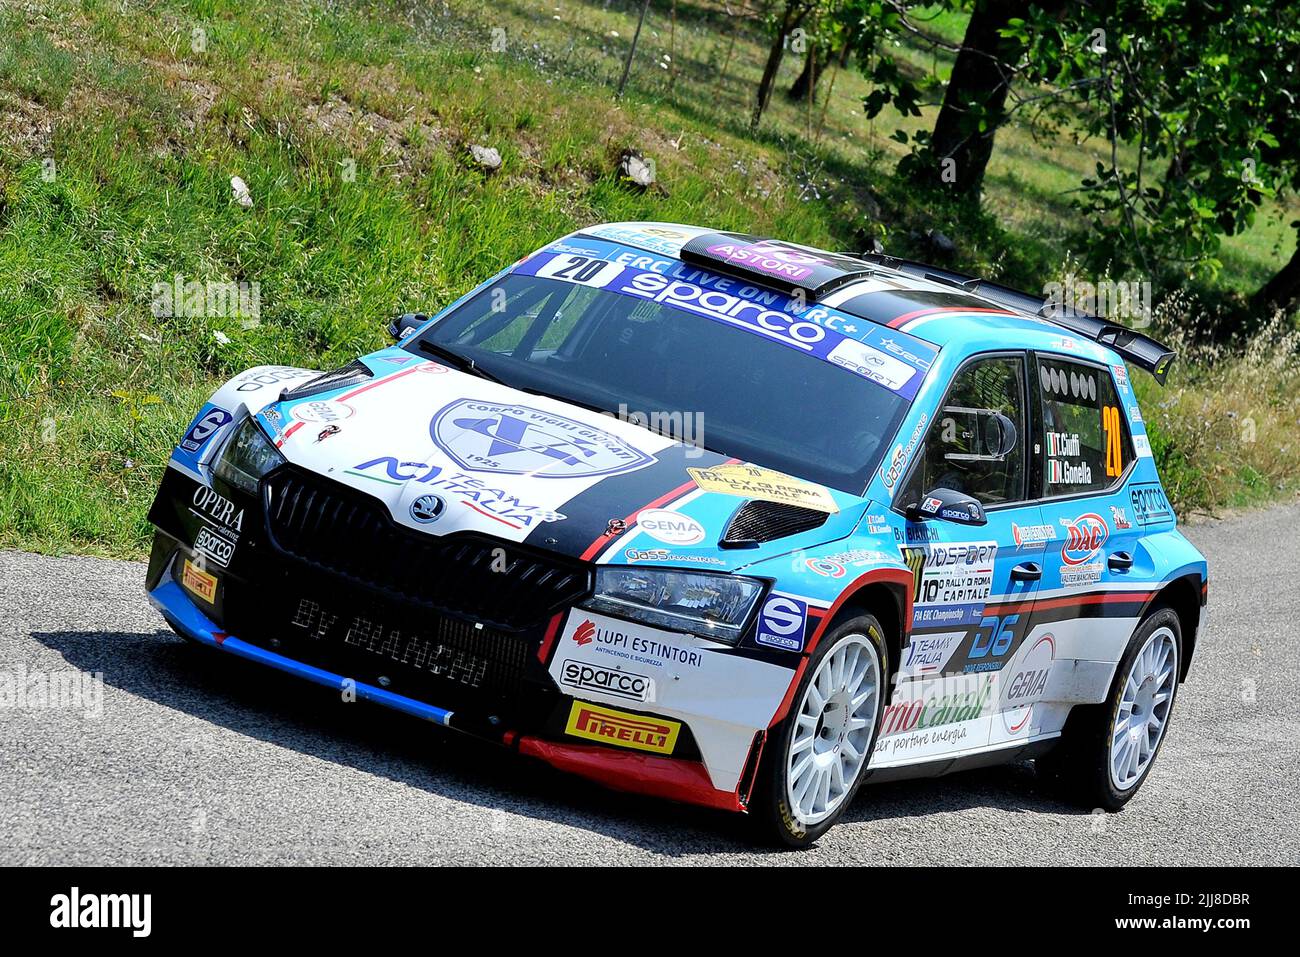 The driver Tommaso Ciuffi and his co-driverNicolò Gonella aboard their  Skoda Fabia Rally 2 Evo car, during the Santopadre - Fontana Liri stage of  the 10 edition of the FIA European Rally